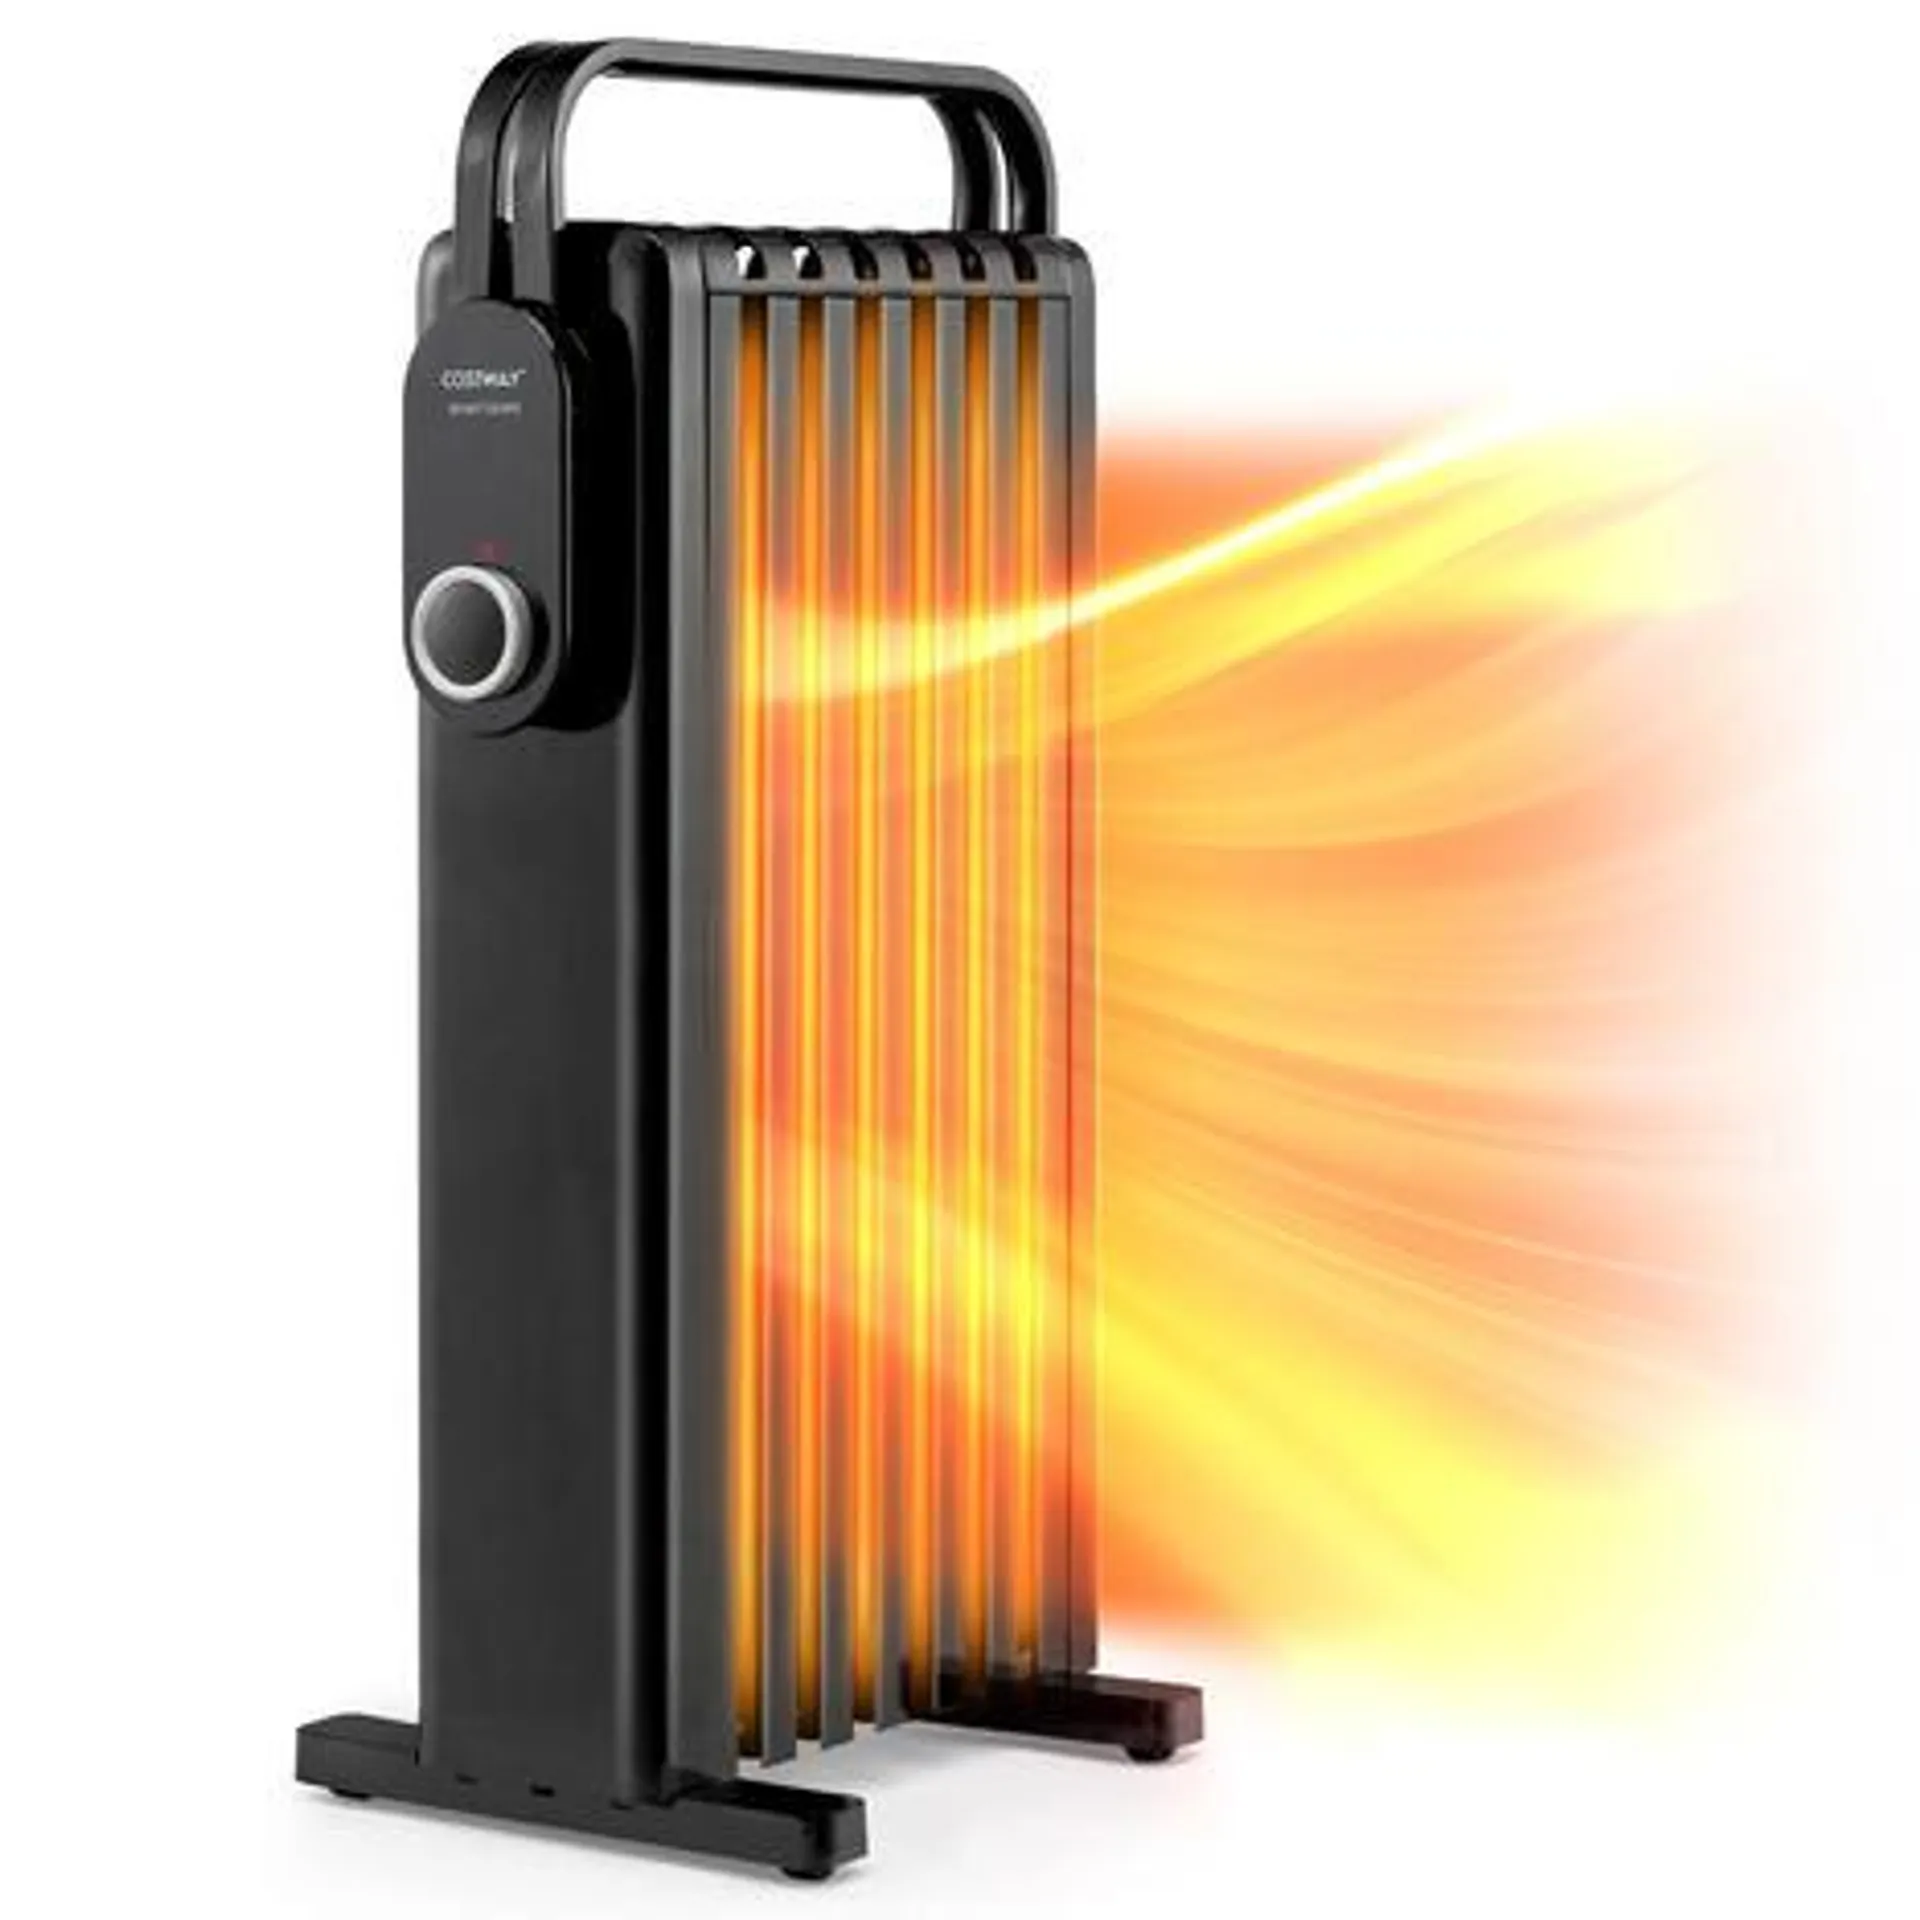 Costway 1500W Oil-Filled Radiator Space Heater Electric Portable Heater w/3 Heat Setting